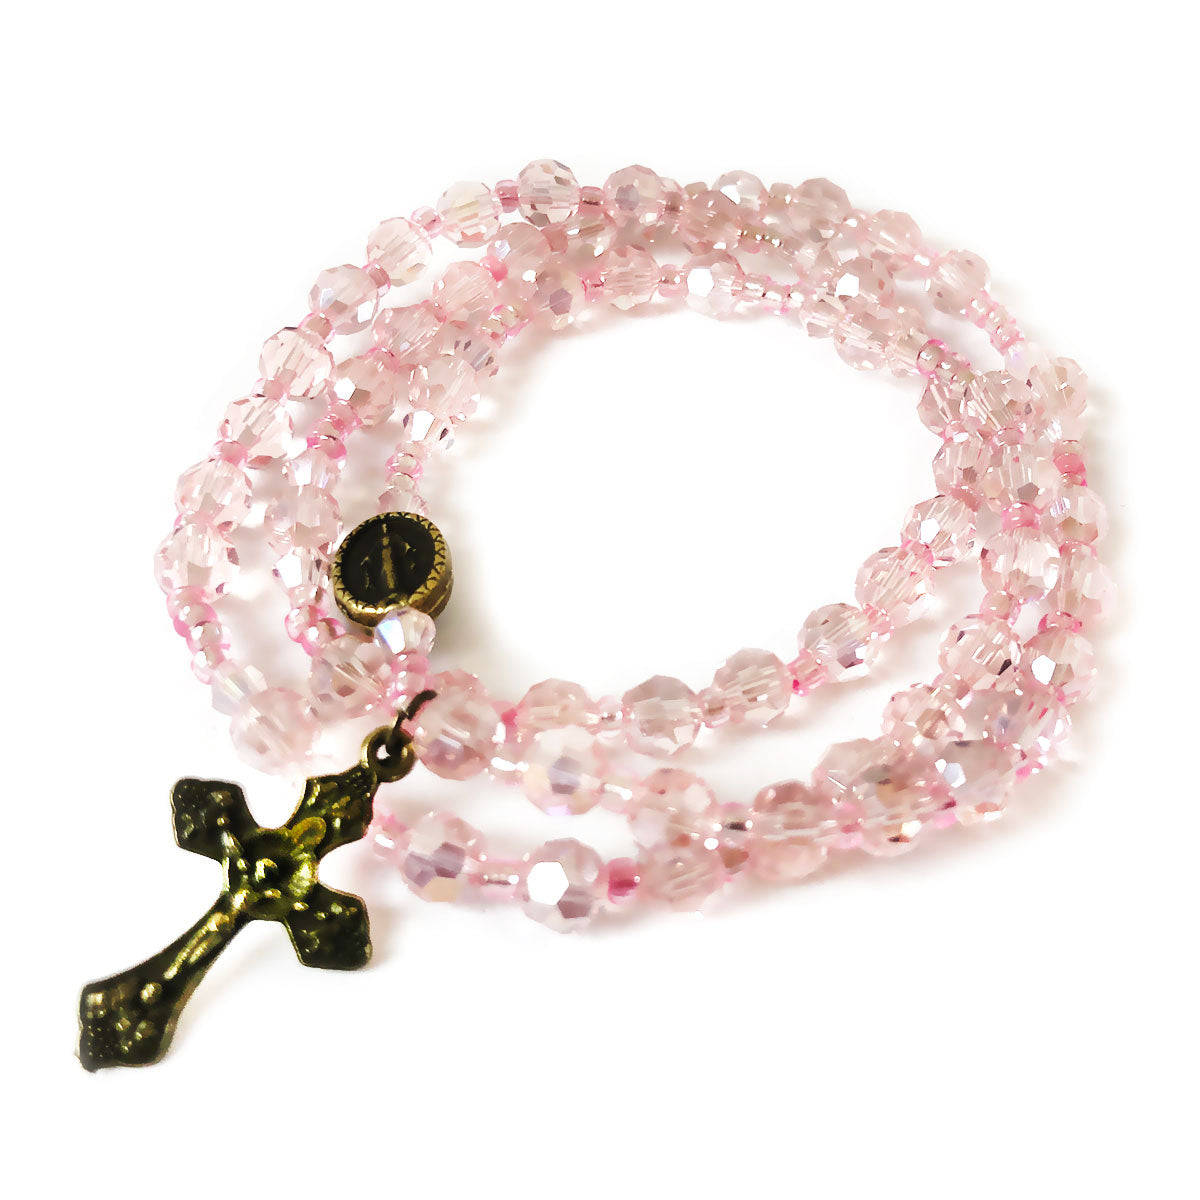 St. Therese Friendship Bracelet - Society of the Little Flower - US